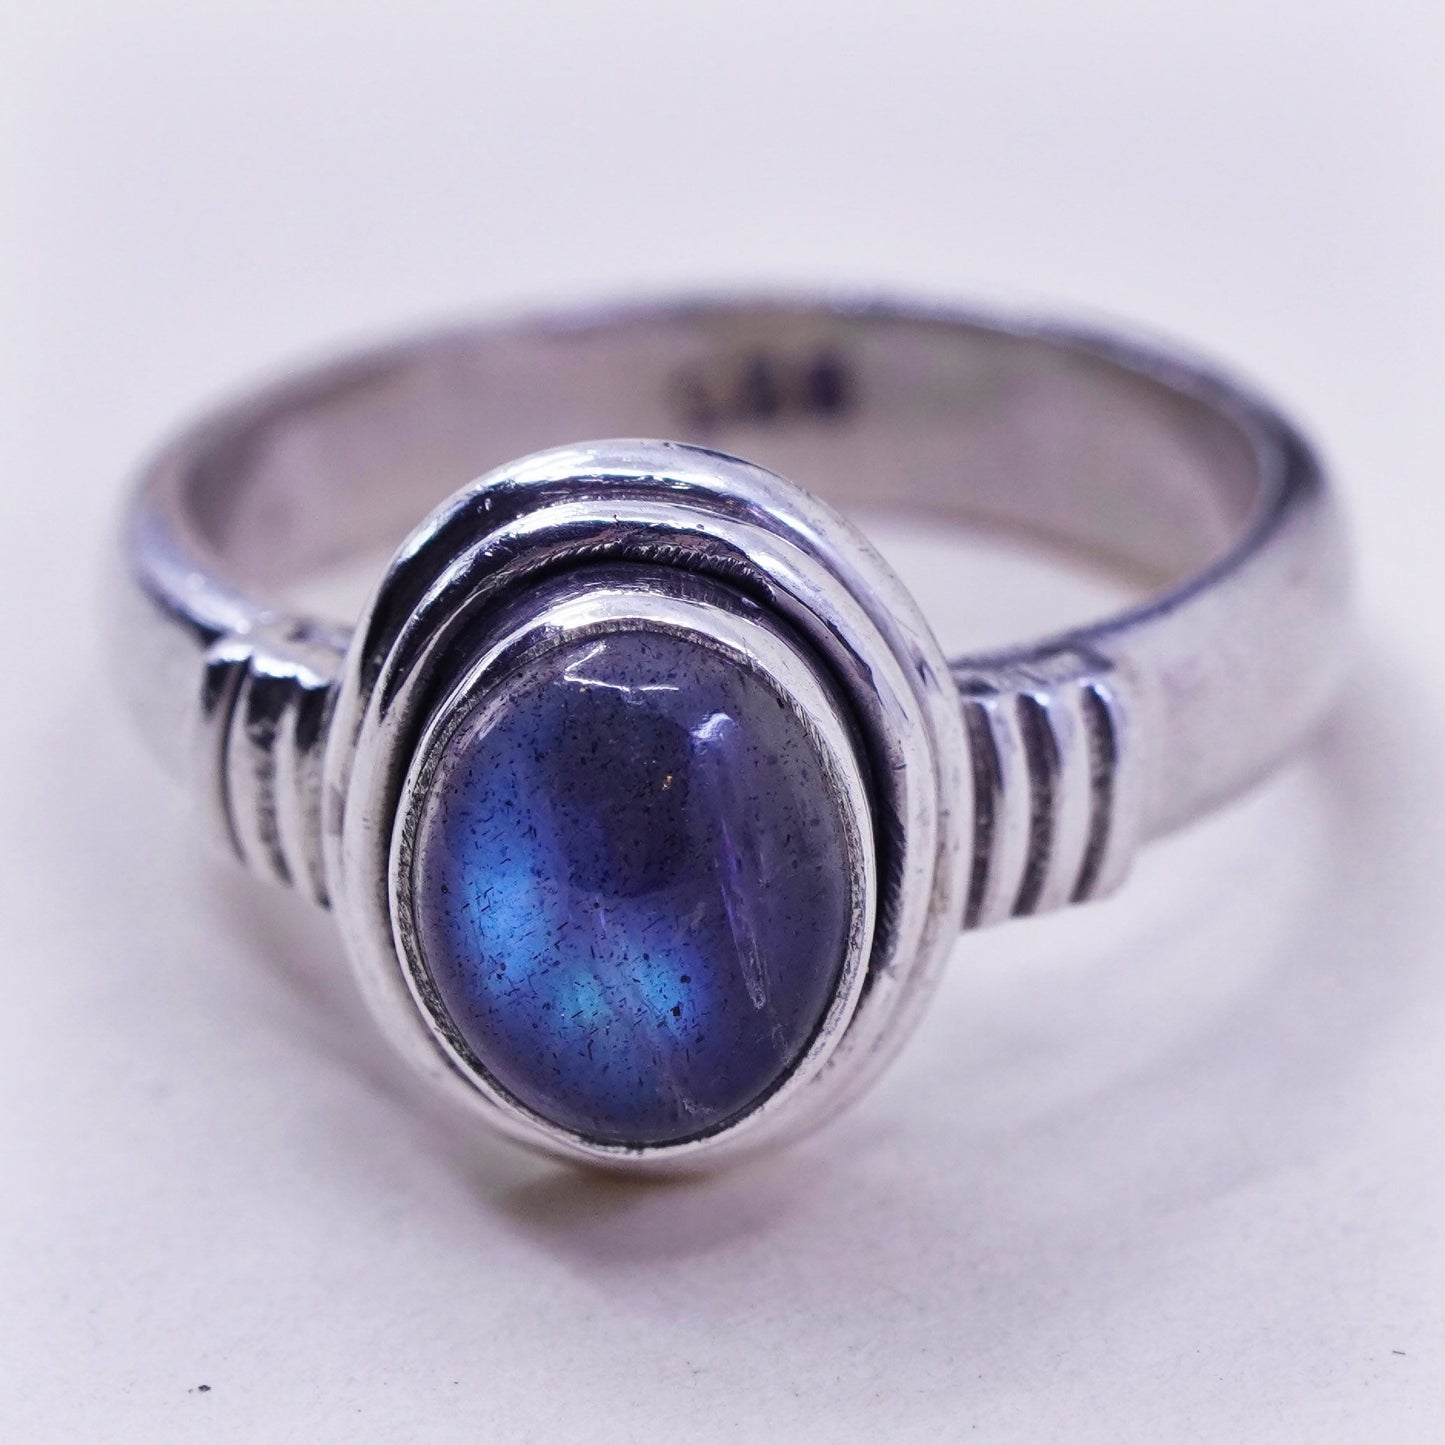 Size 8, vintage Sterling silver handmade ring, 925 with oval labradorite